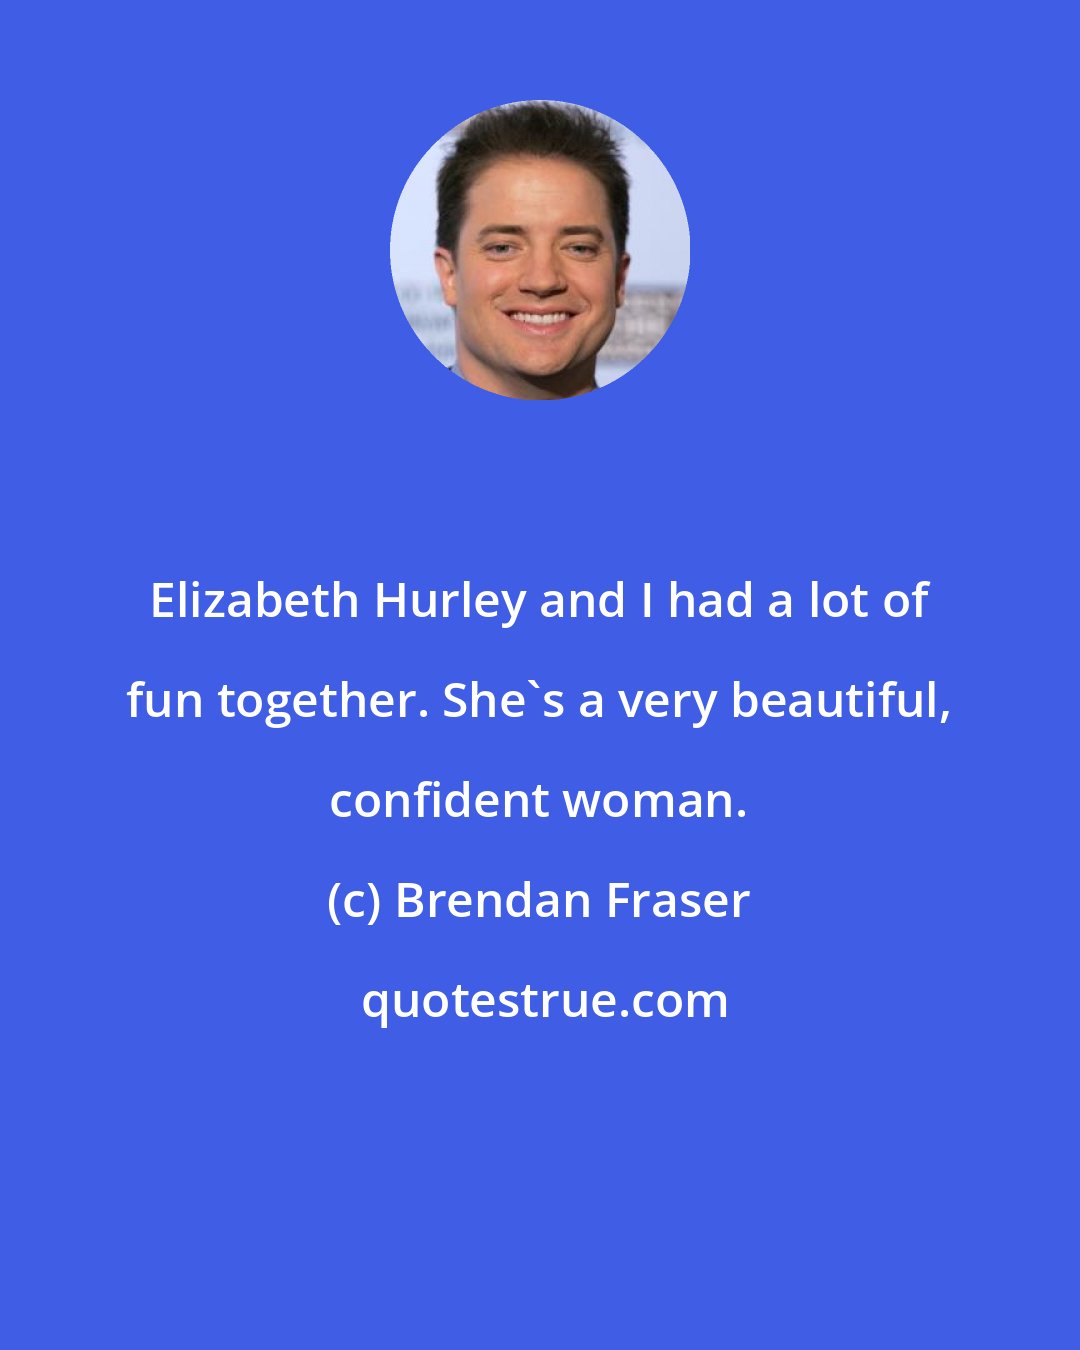 Brendan Fraser: Elizabeth Hurley and I had a lot of fun together. She's a very beautiful, confident woman.